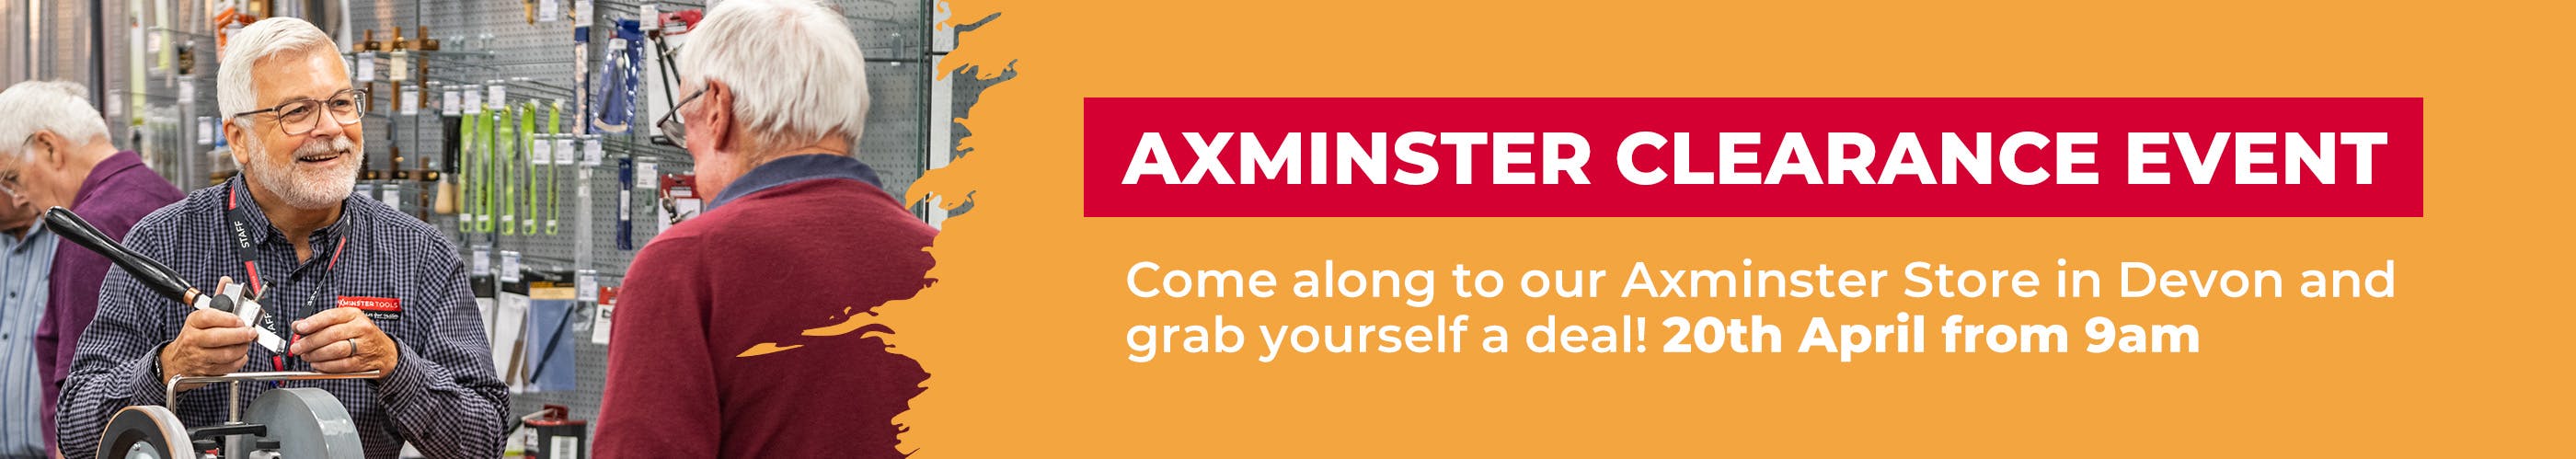 Axminster Clearance Event